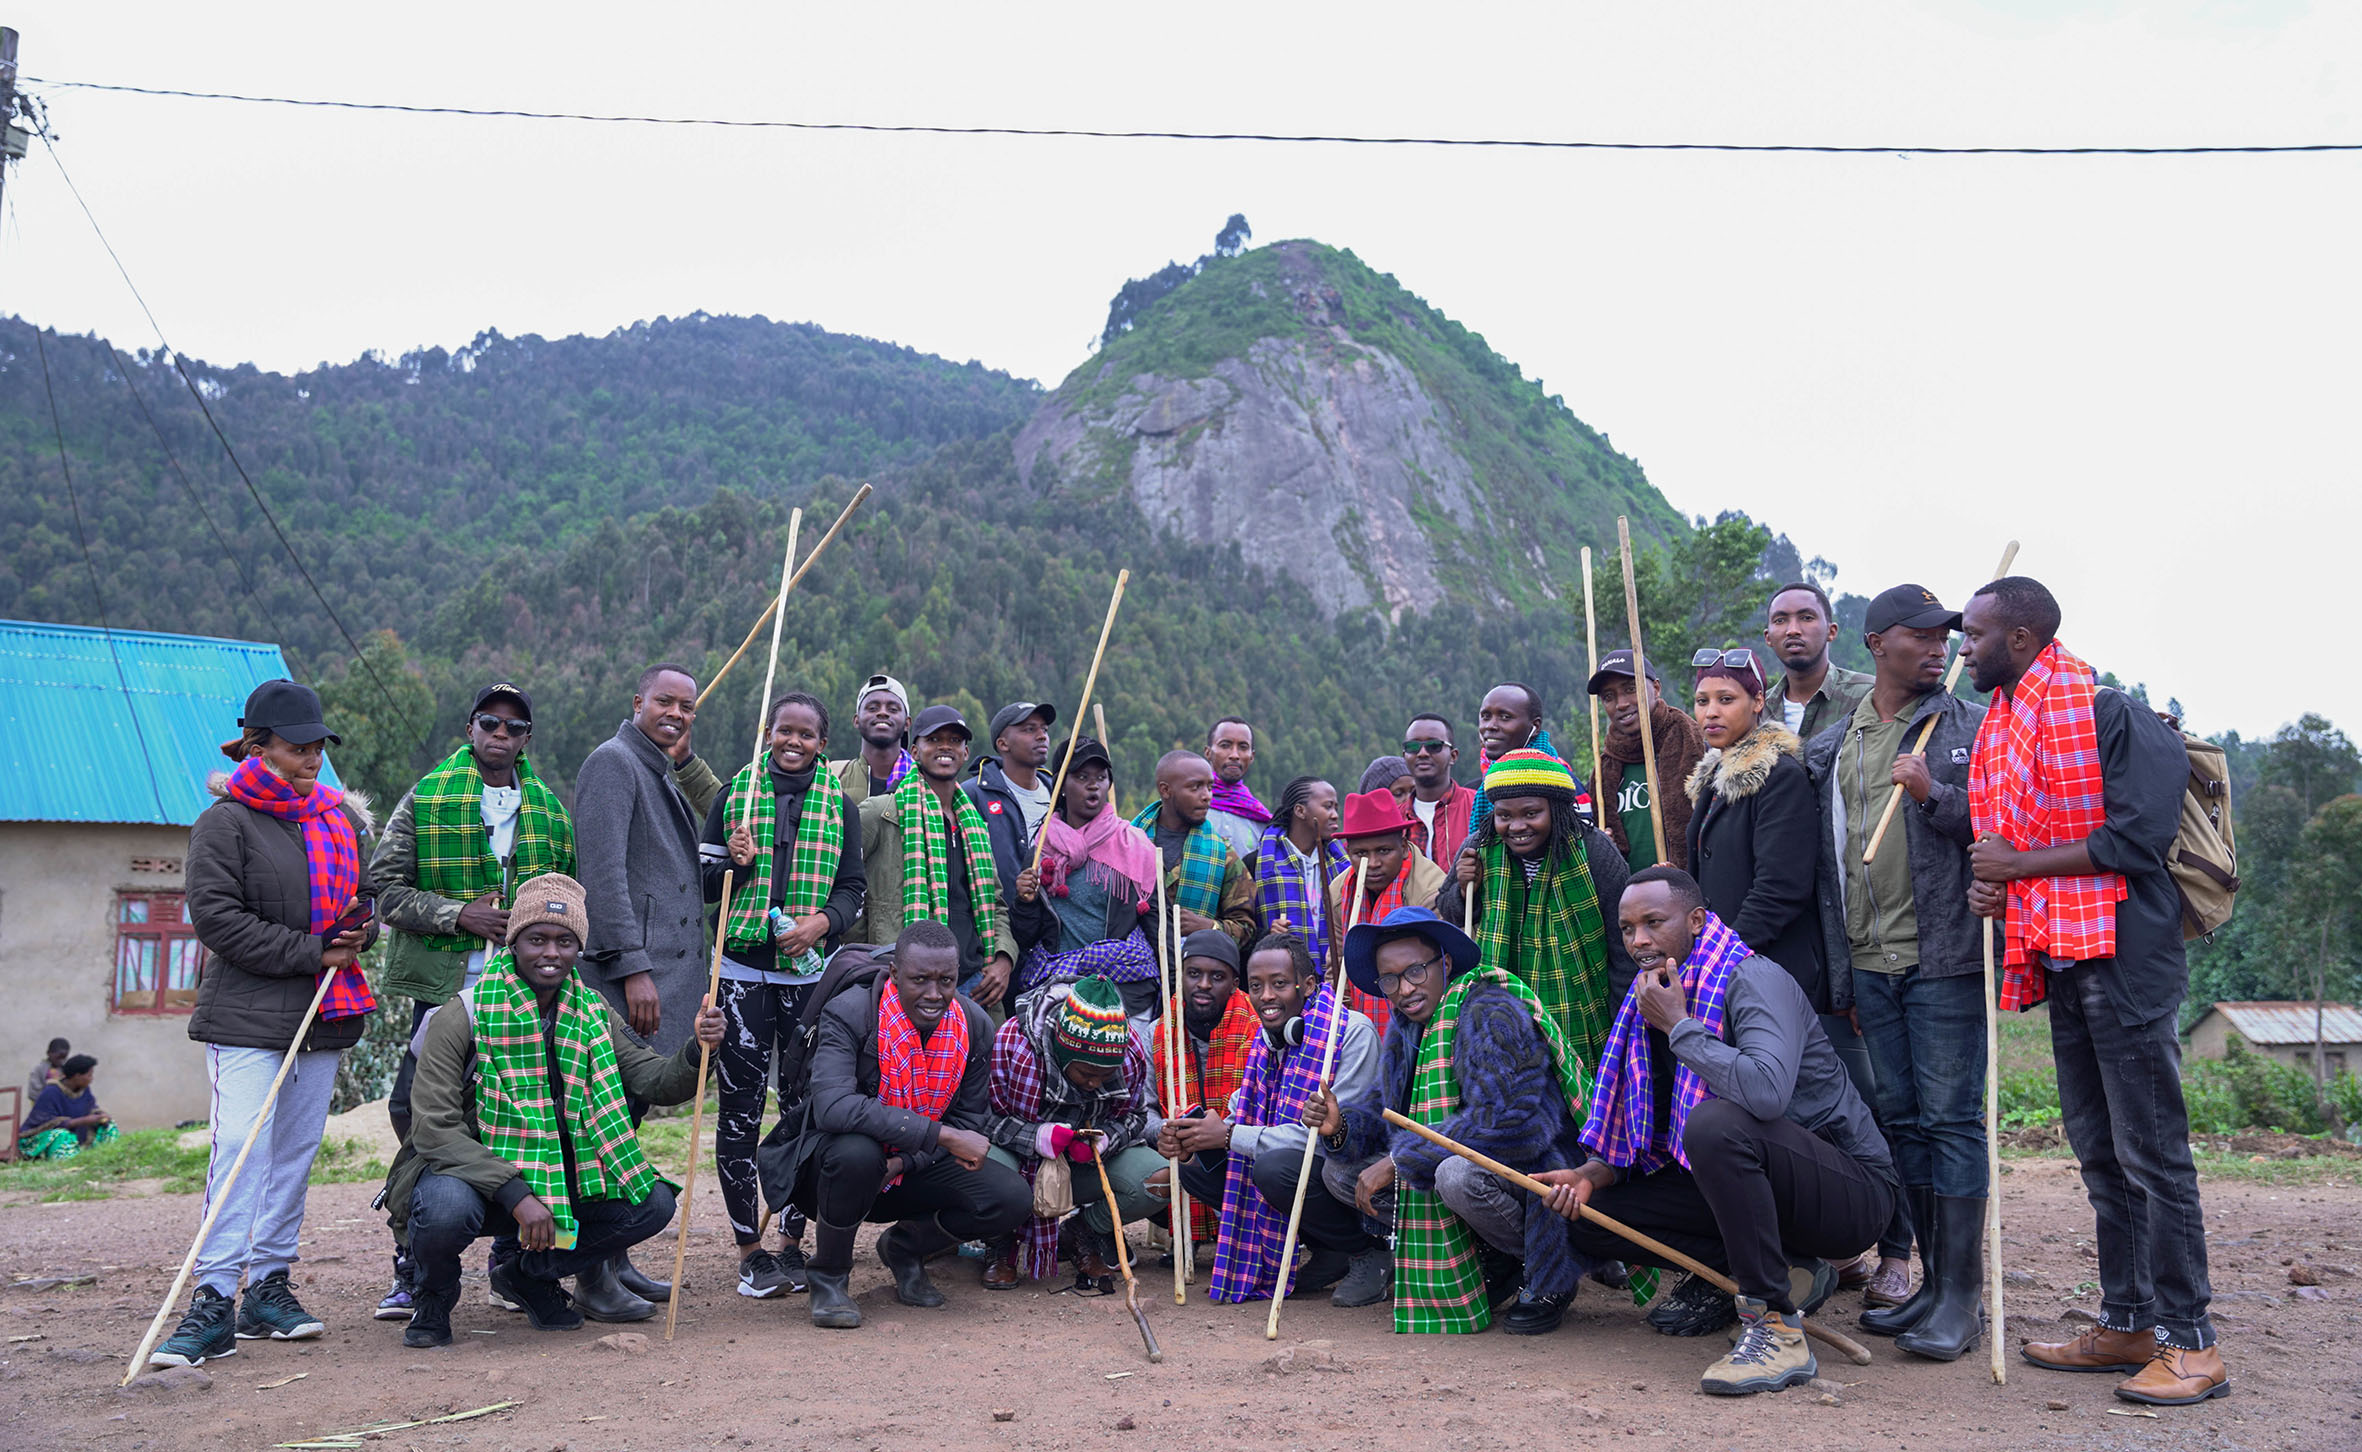 Bigogwe visitors pose for a group photo before they start hiking in Nyabihu District. Seen in the background is the famous Ibere rya Bigogwe (Bigogweu2019s breast) Mountain, which most believe is shaped like a womanu2019s breast. / Photos: Dan Nsengiyumva.